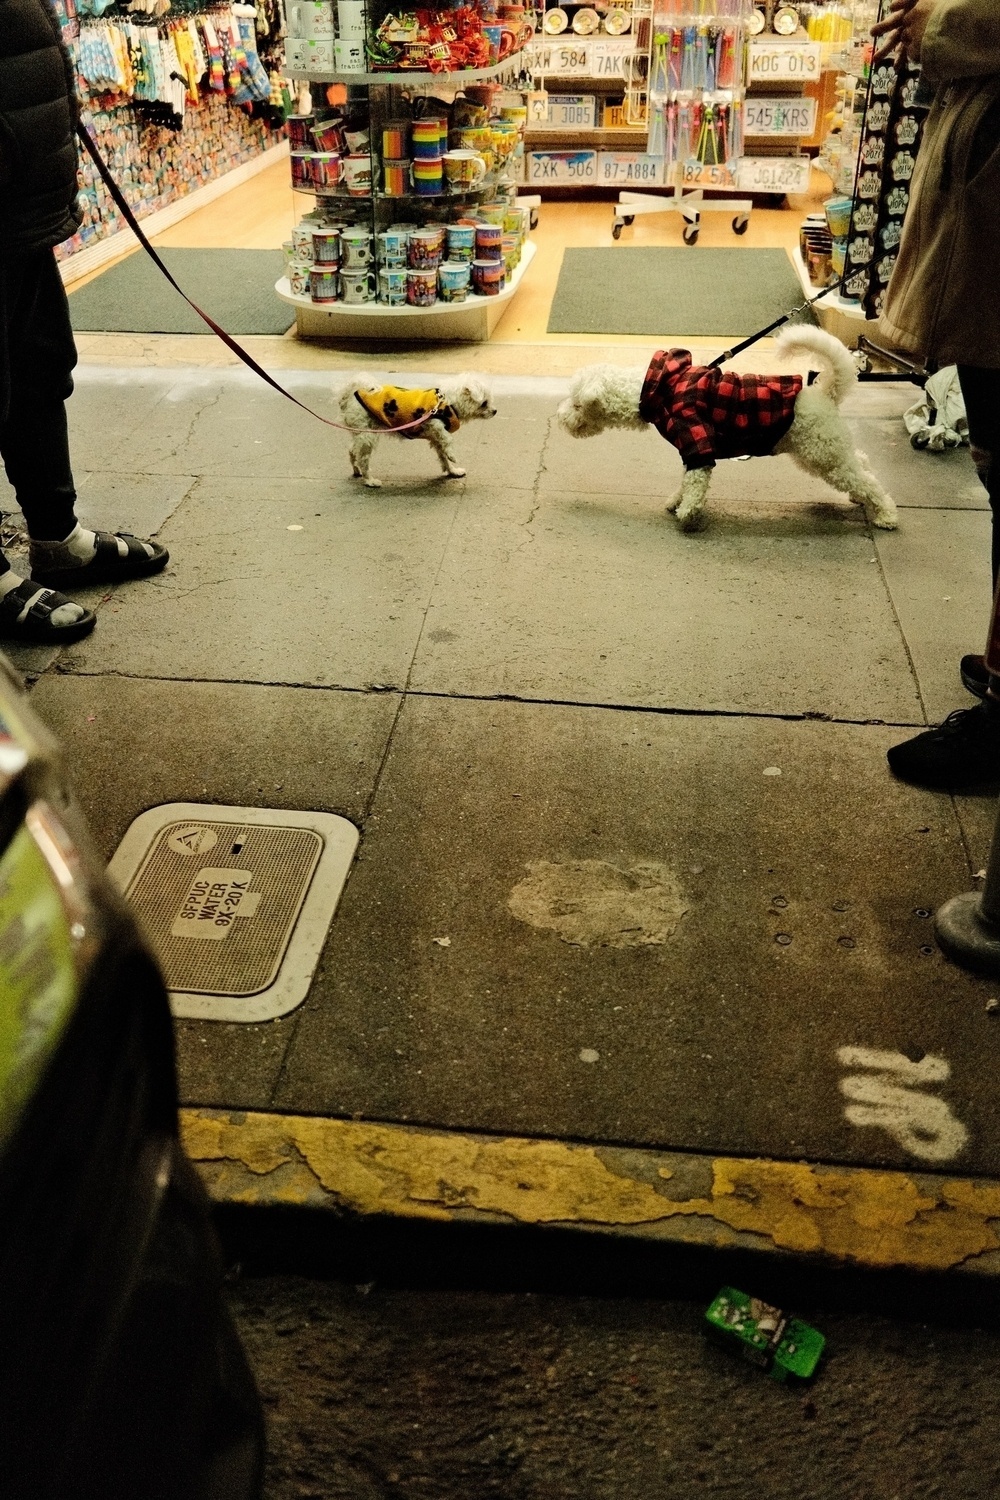 Two small dogs in costumes on leashes, with a person standing nearby. One dog is in a yellow outfit with eyes like goggles, the other in a red plaid jacket. They appear to be on a city sidewalk outside a souvenir shop.